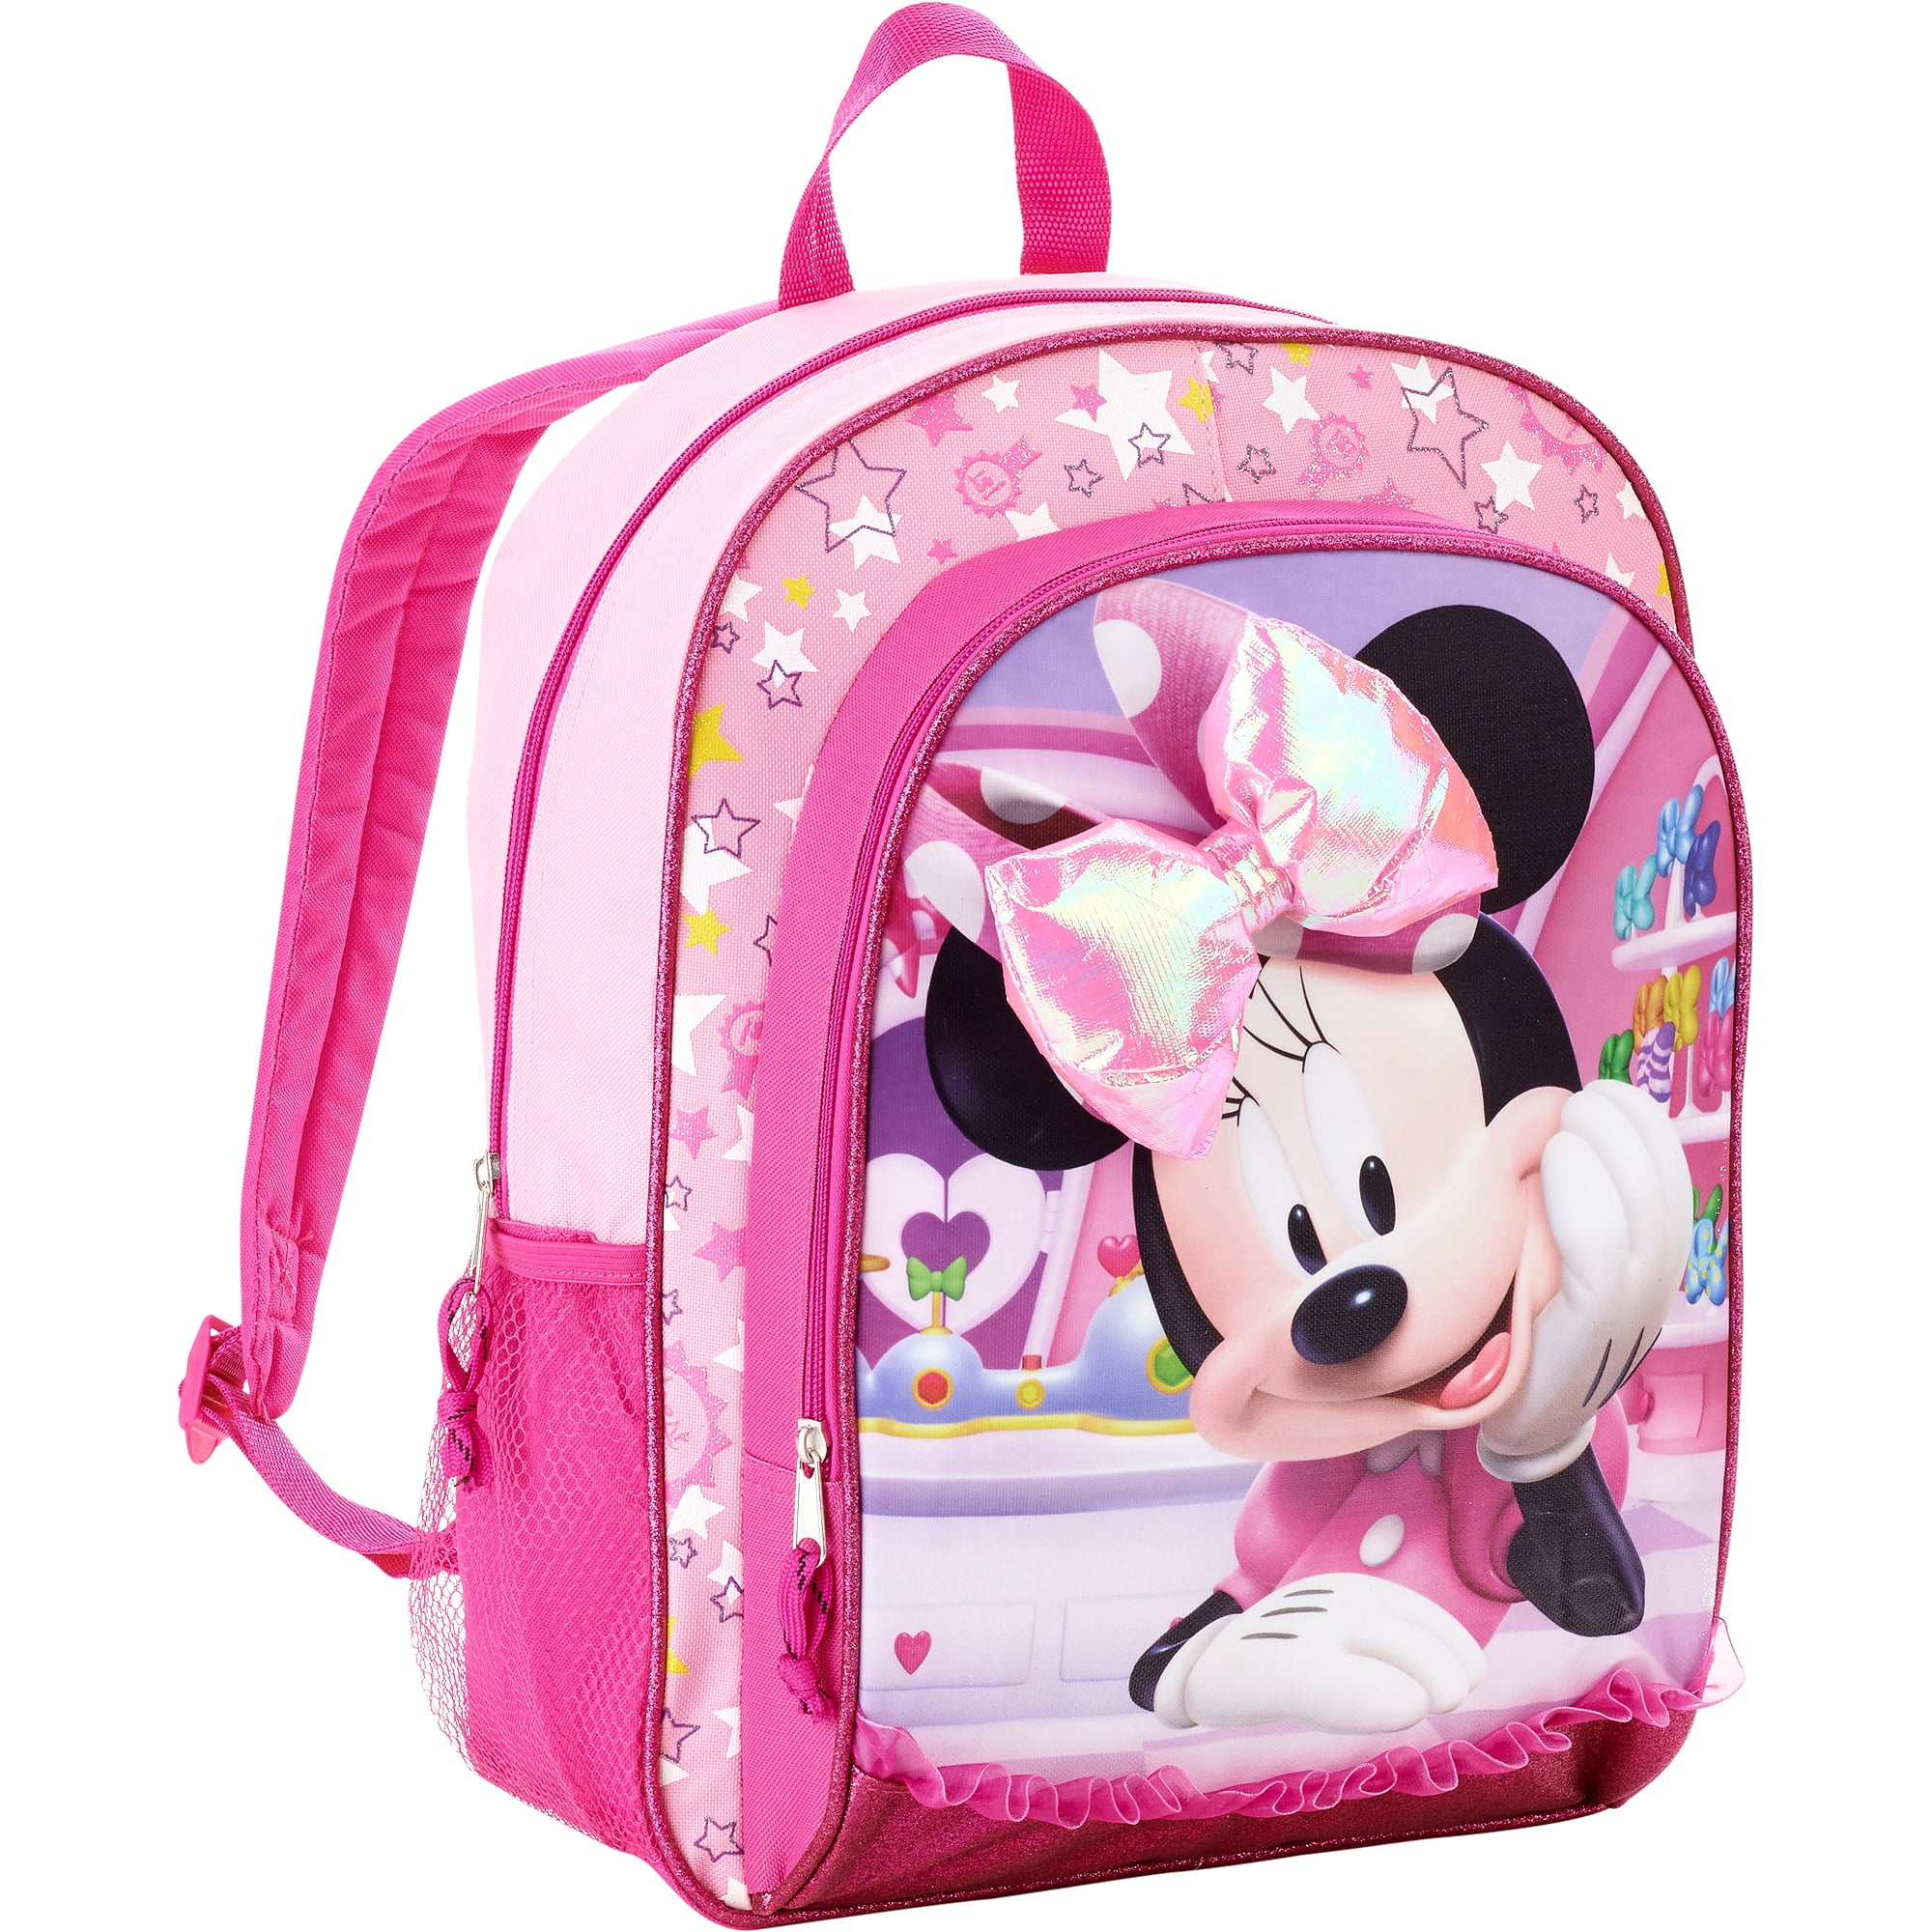 Minnie Mouse Disney Minnie Mouse 16" Backpack Walmart